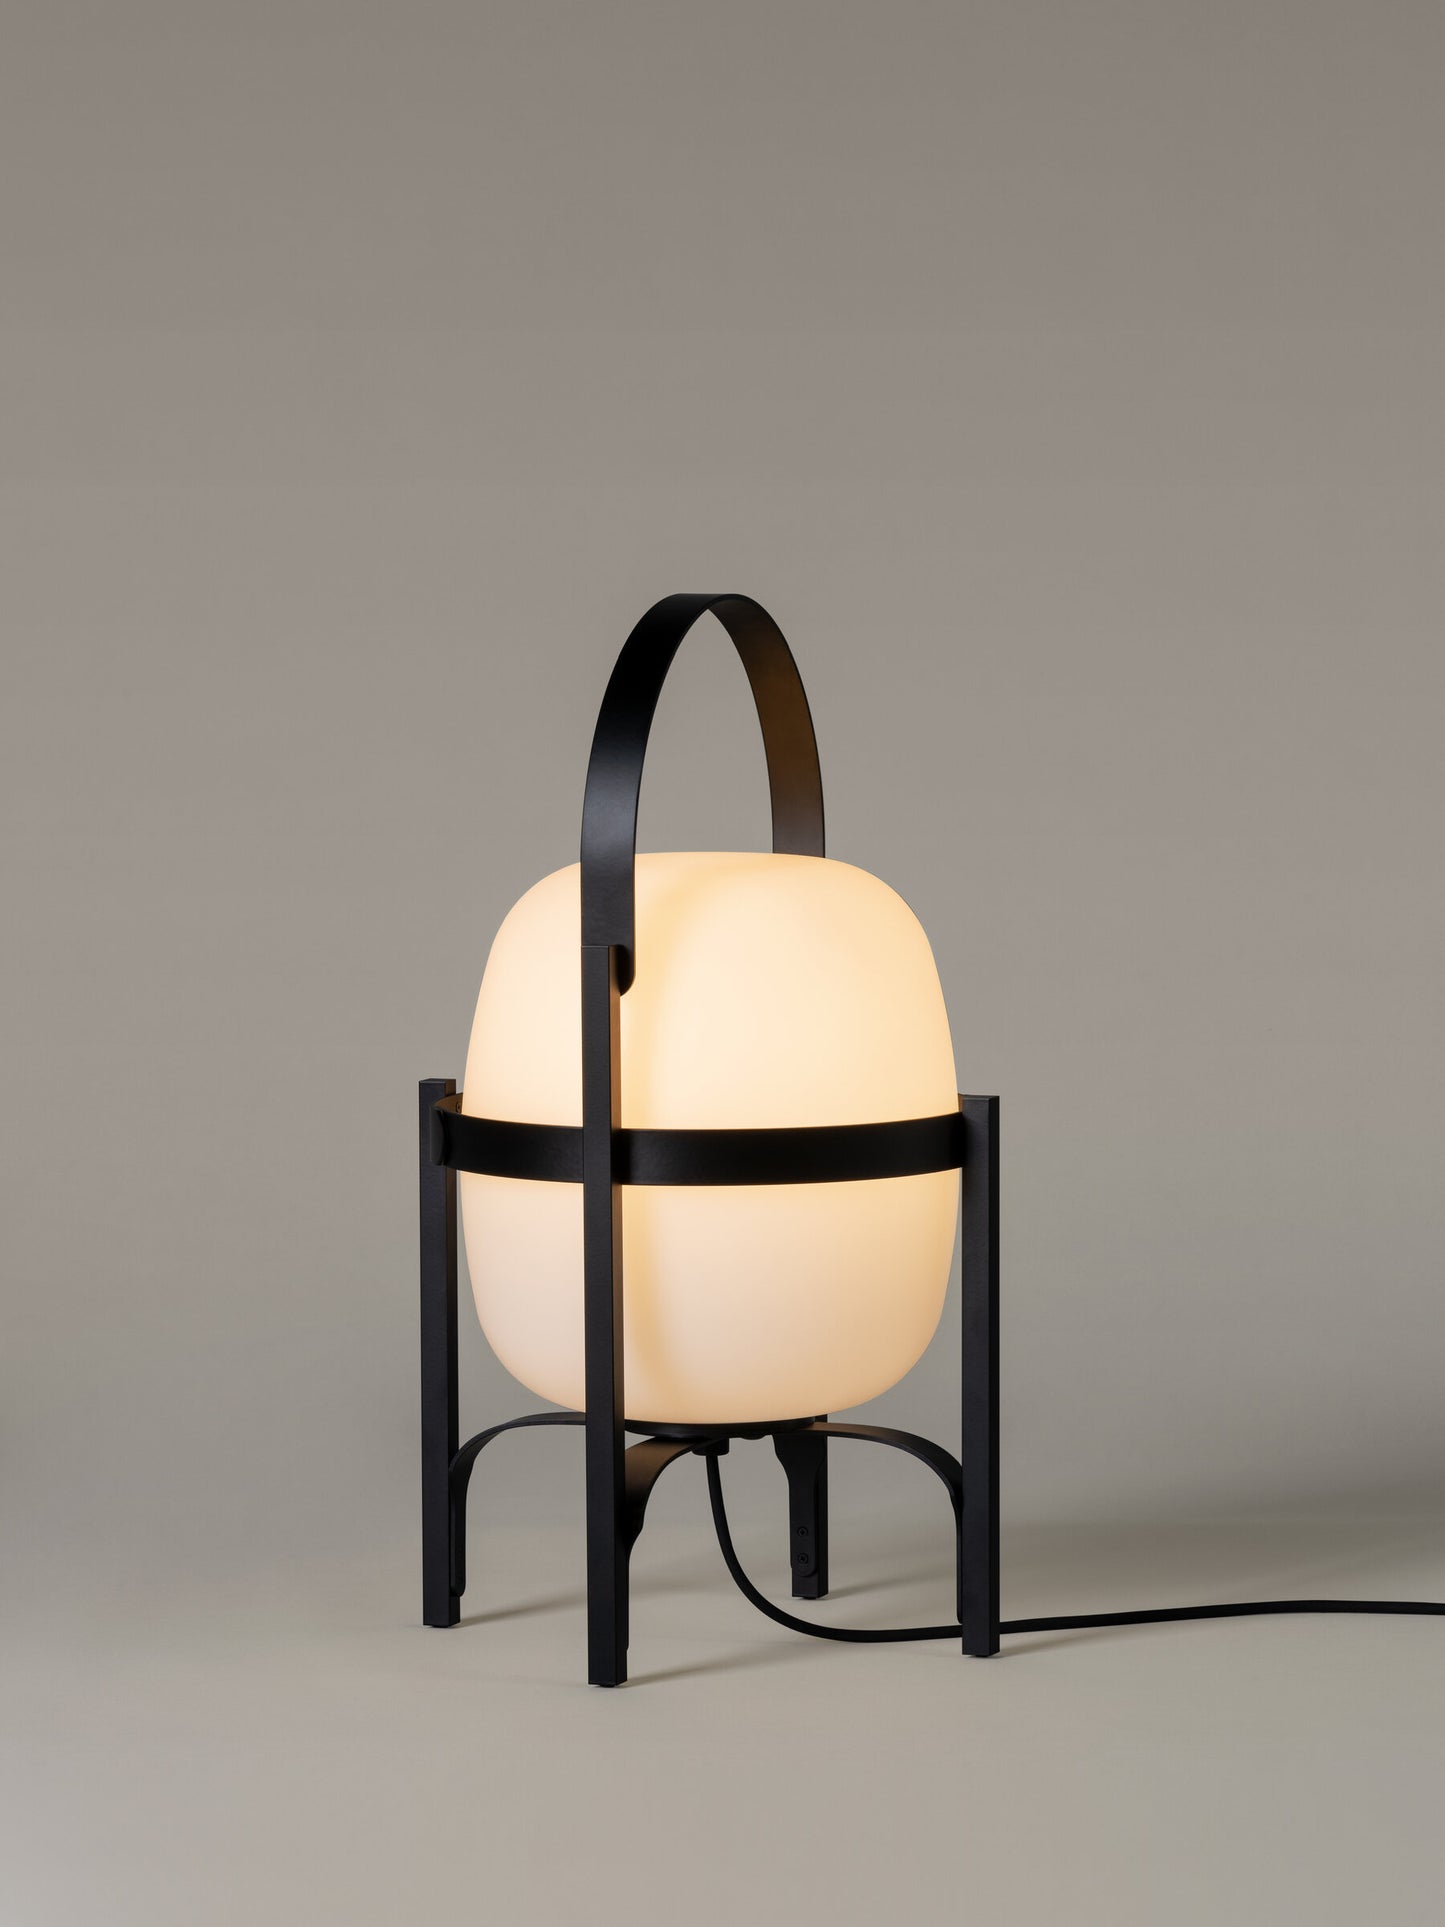 Santa and Cole Cesta Floor Lamp for Outdoor Use